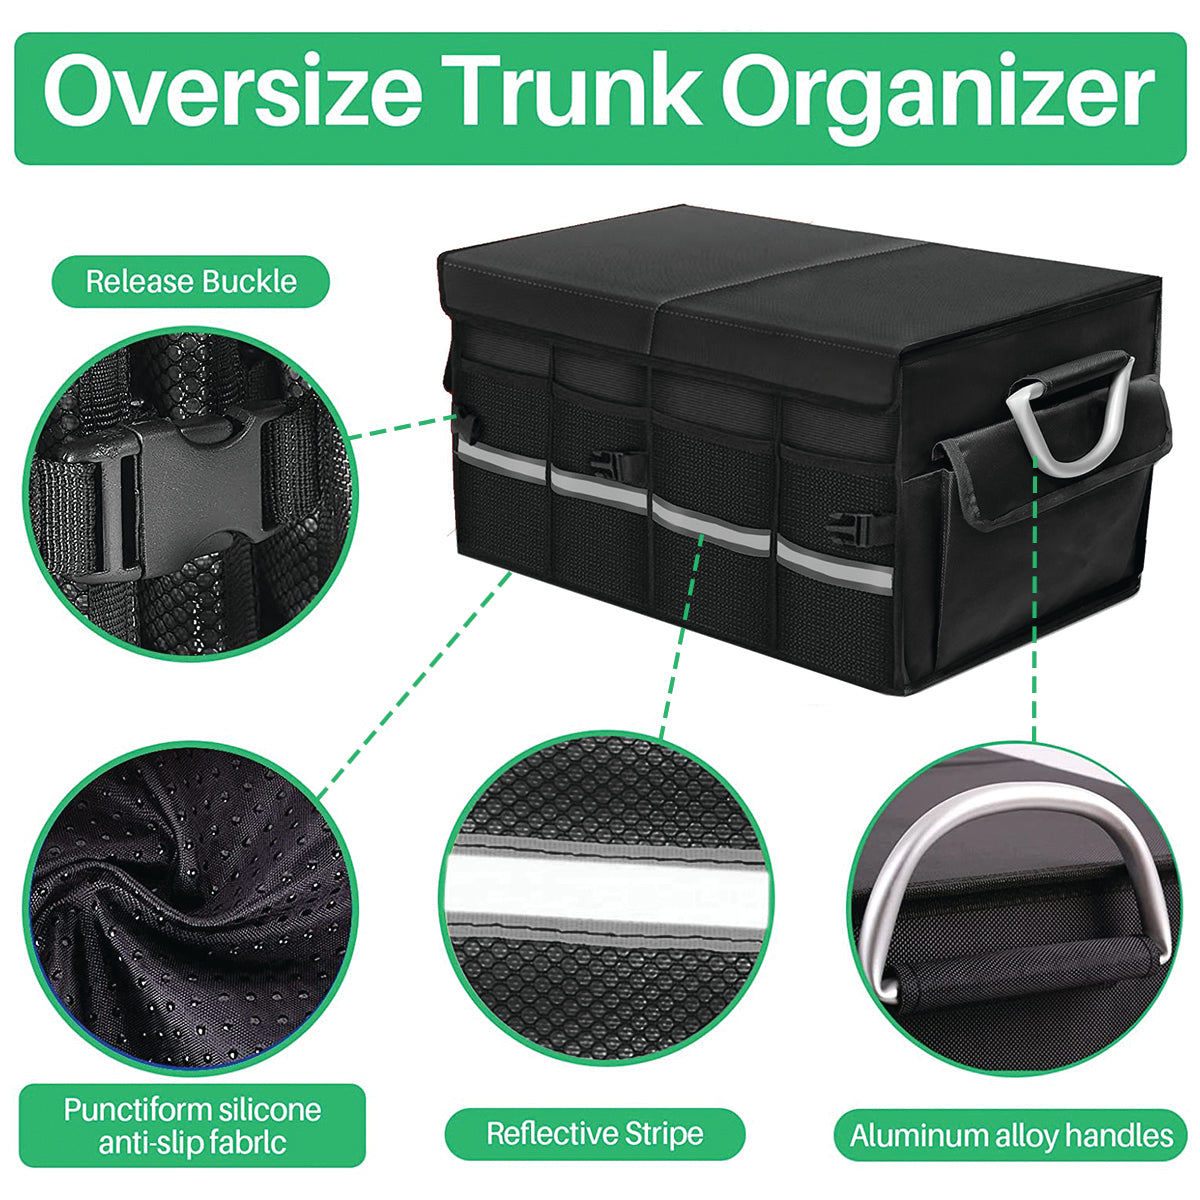 Big Trunk Organizer, Custom-Fit For Car, Cargo Organizer SUV Trunk Storage Waterproof Collapsible Durable Multi Compartments DLMY253